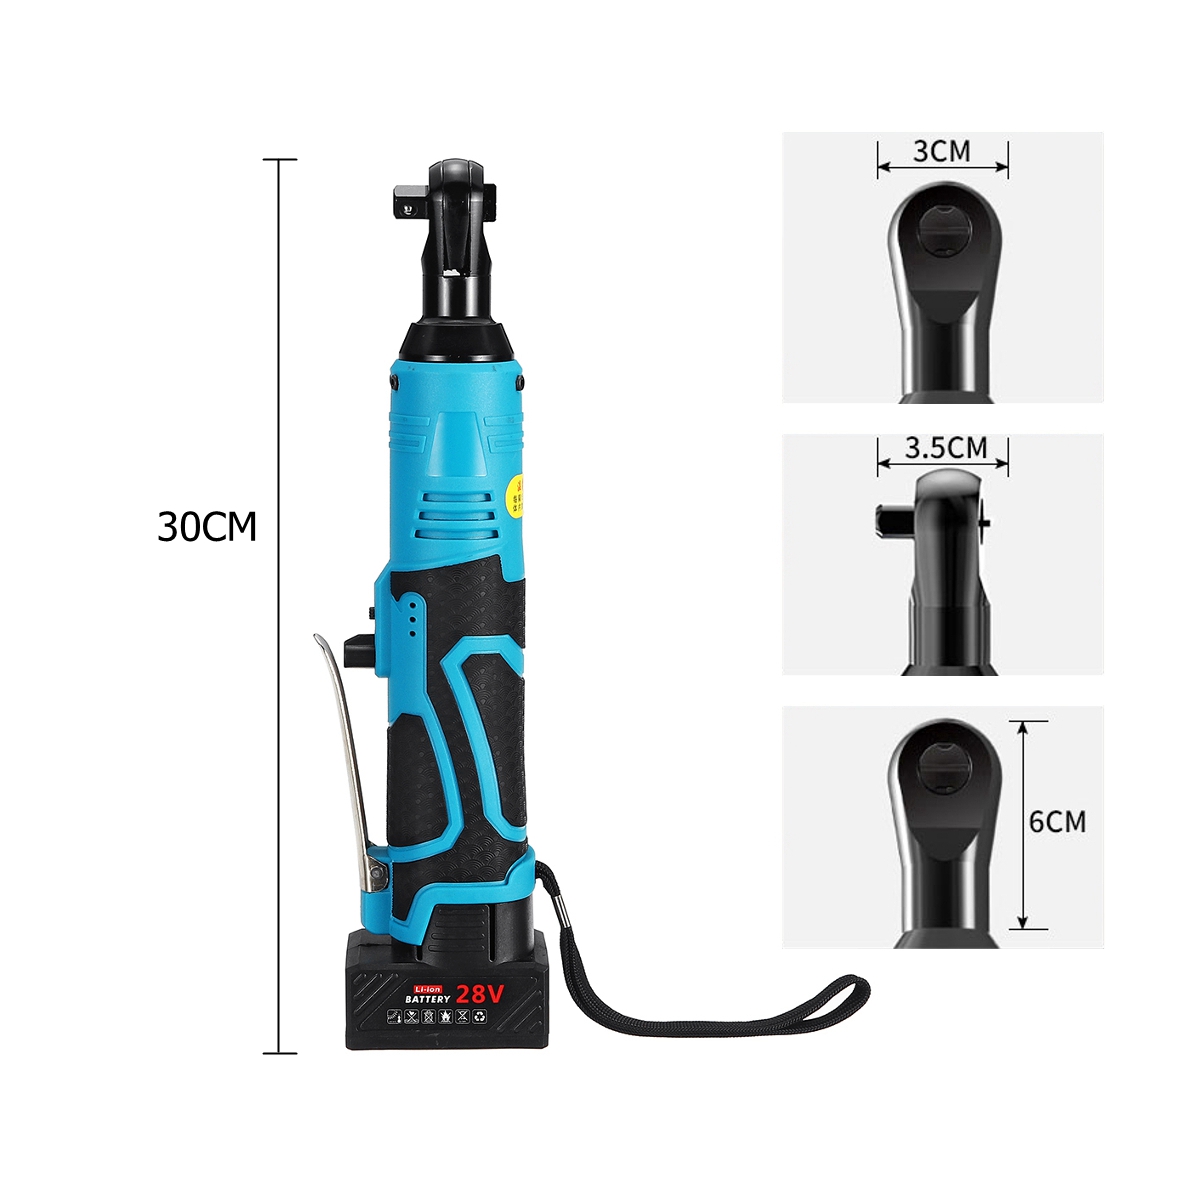 28V-60Nm-Electric-Cordless-90deg-Ratchet-Wrench-38quot-Portable-8000mAh-Rechargeable-Battery-Right-A-1477209-8